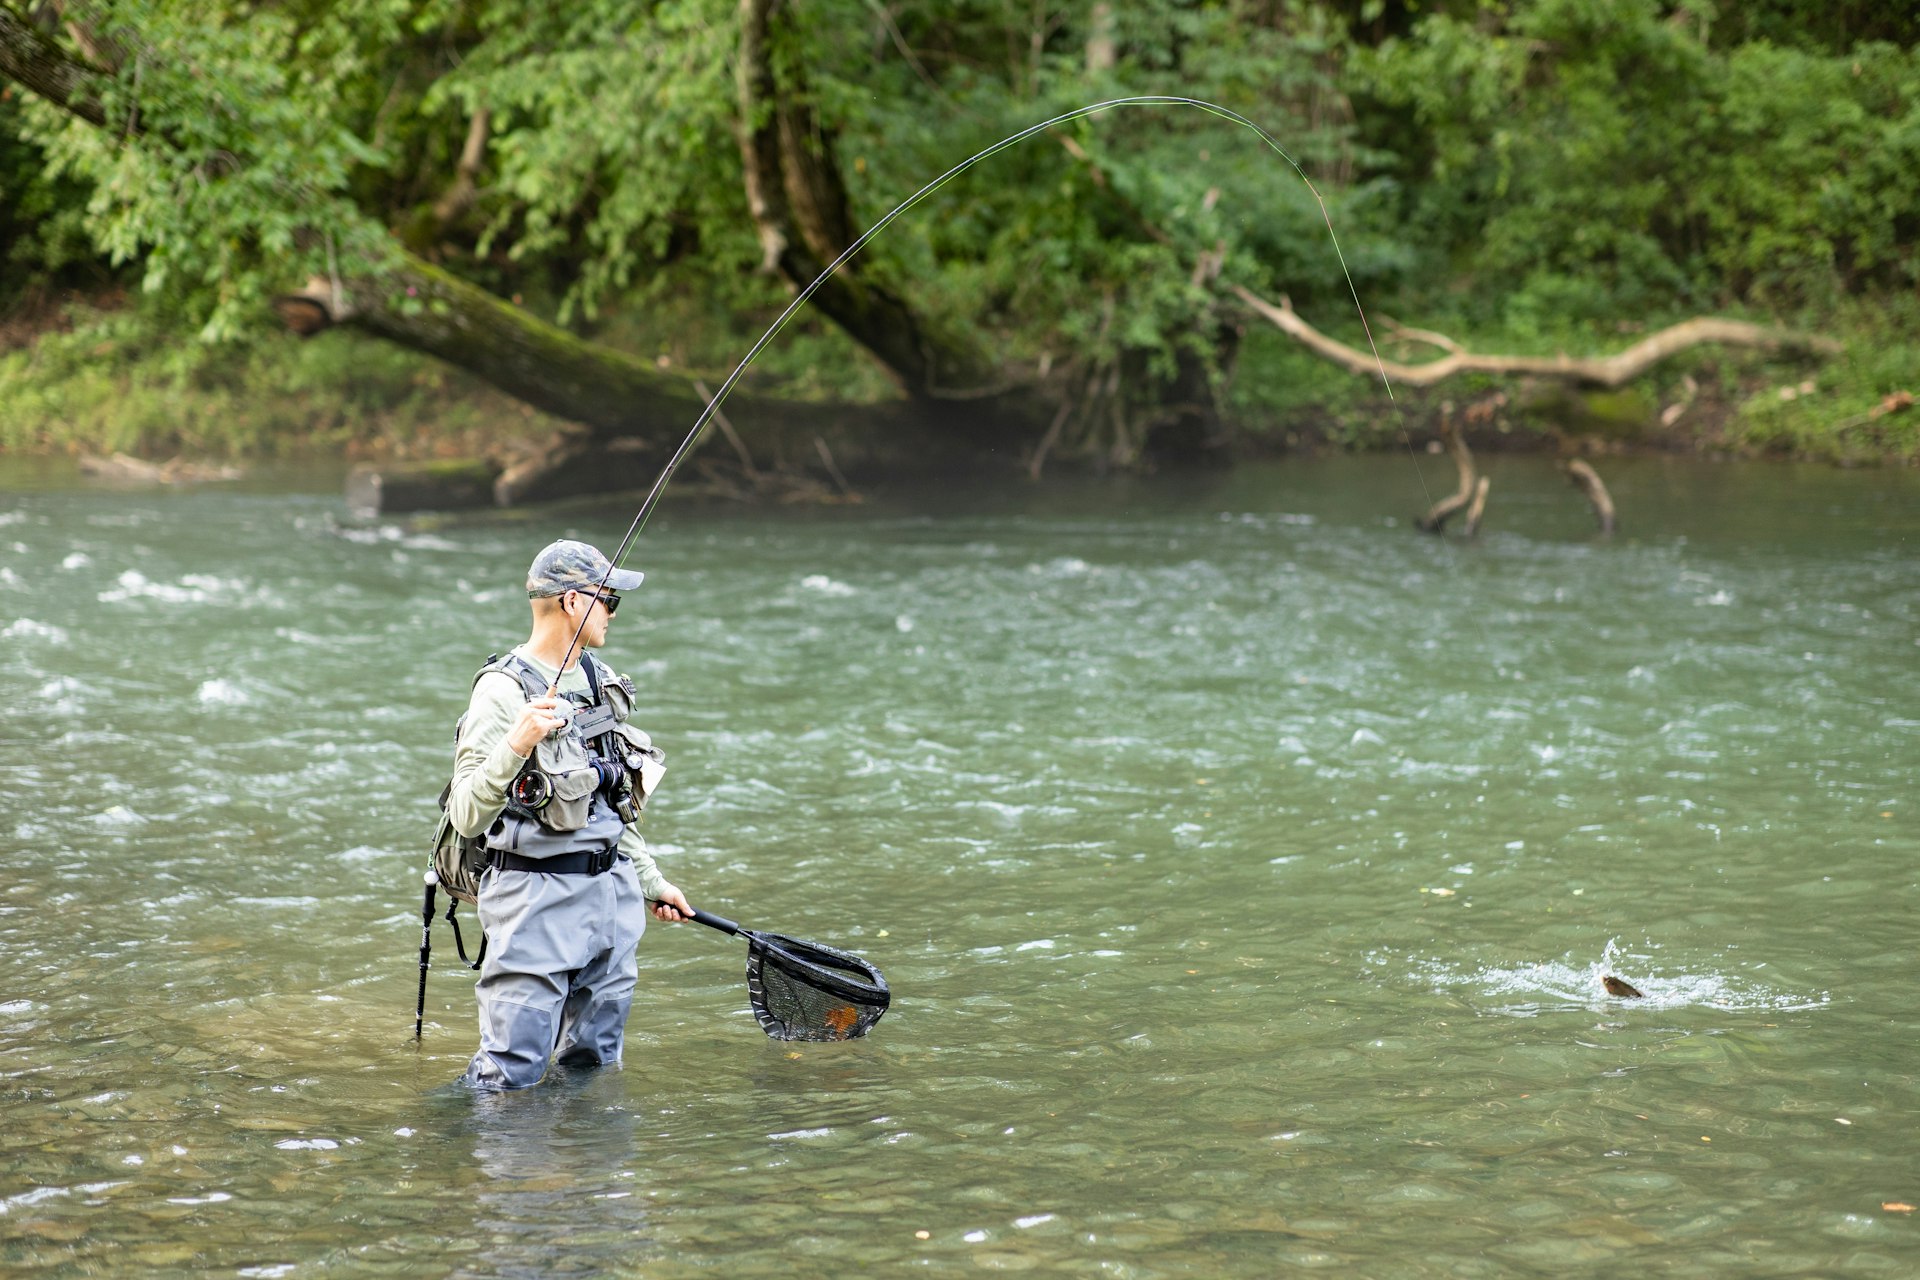 A fly fisher standing in the river hauls in a trout